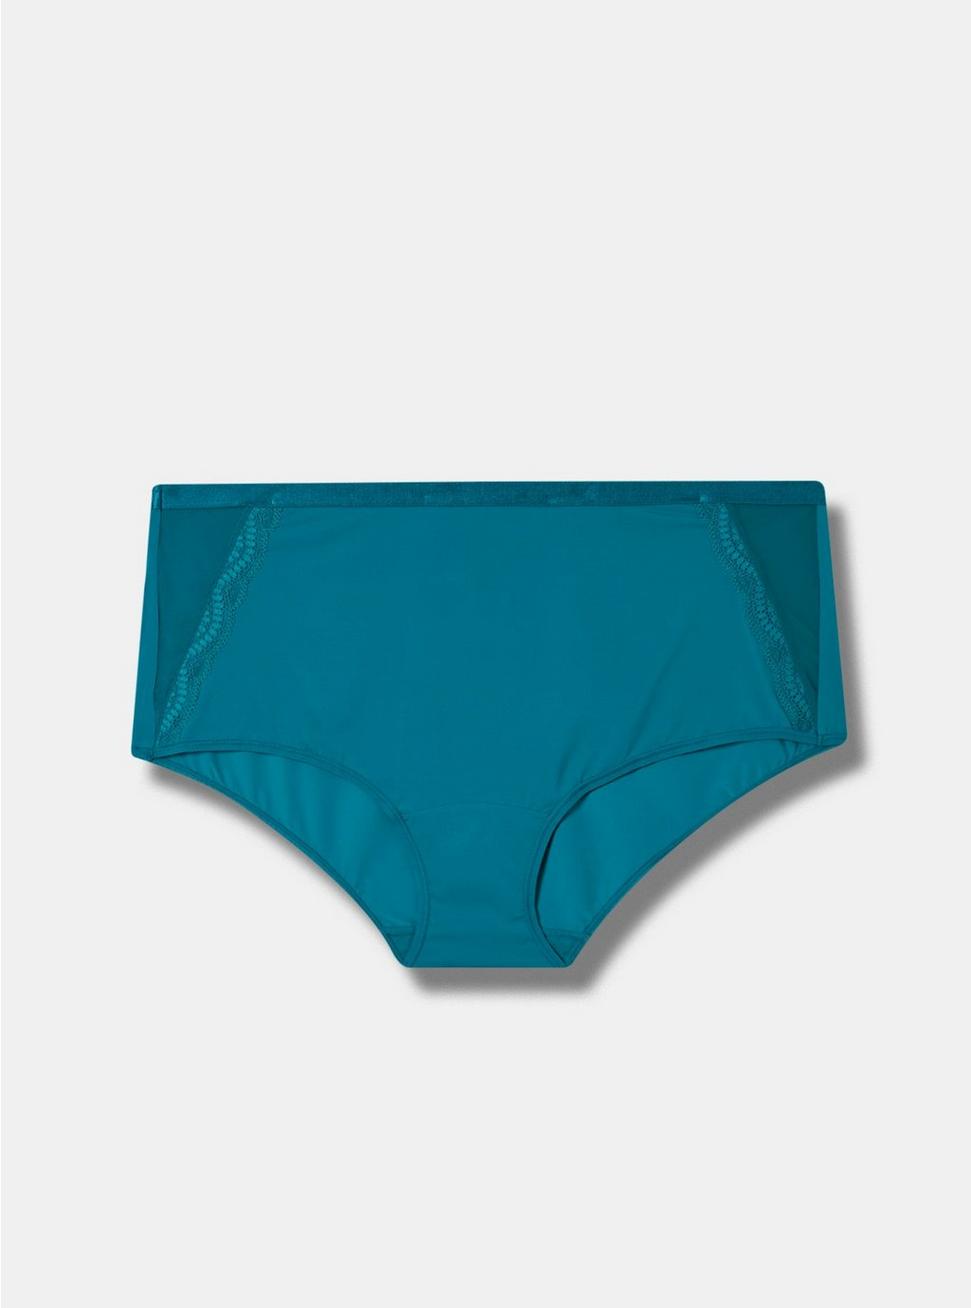 Second Skin Mid-Rise Brief Panty, FANFARE, hi-res